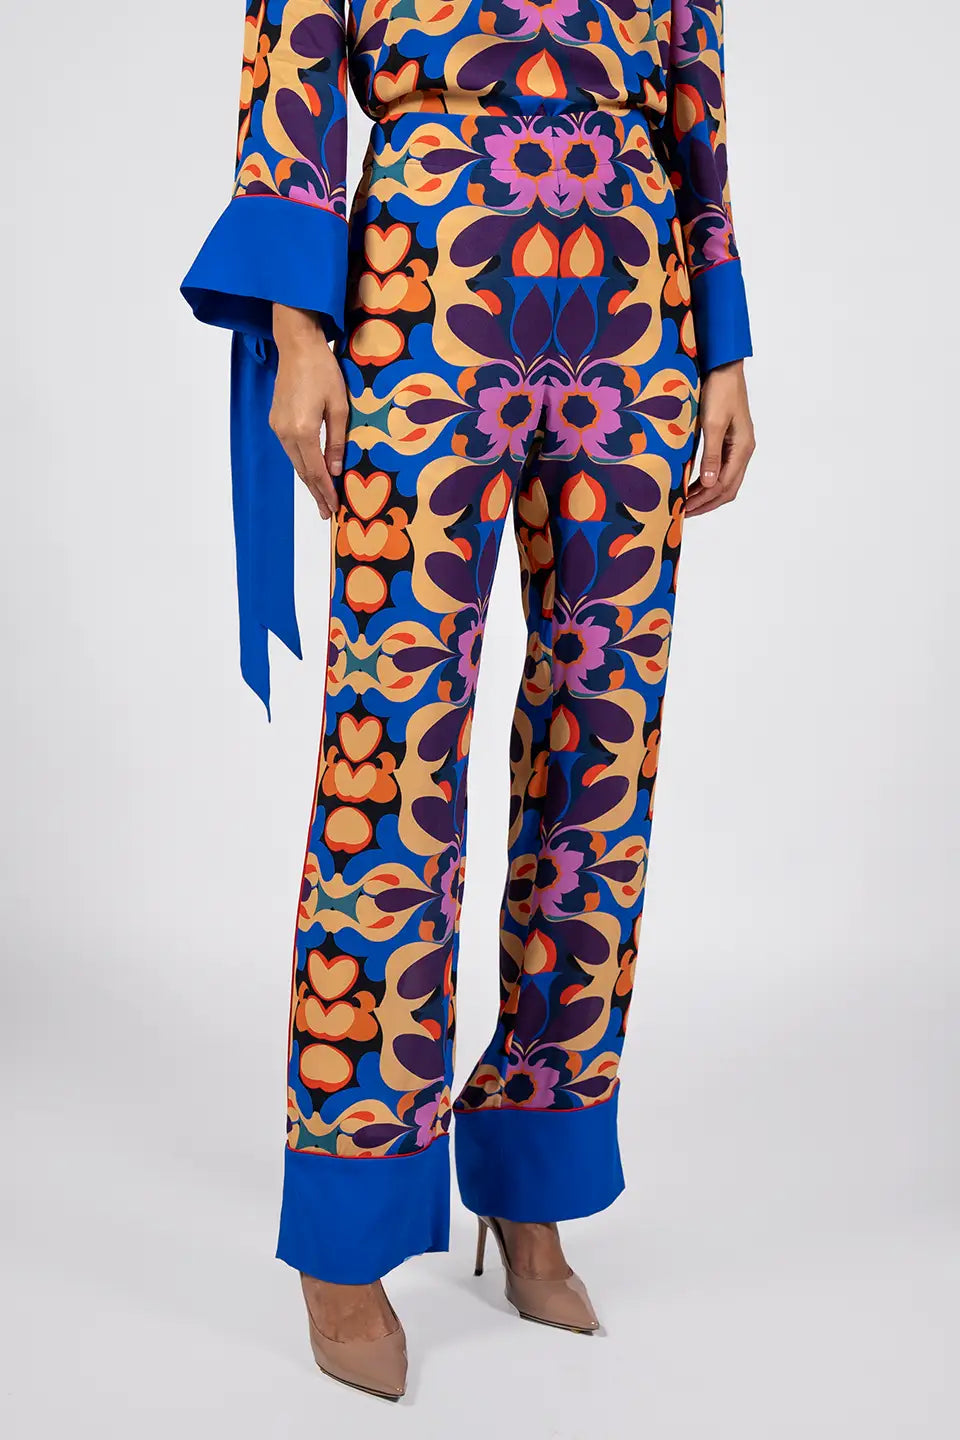 Designer Blue Women pants, shop online with free delivery in UAE. Product gallery 2